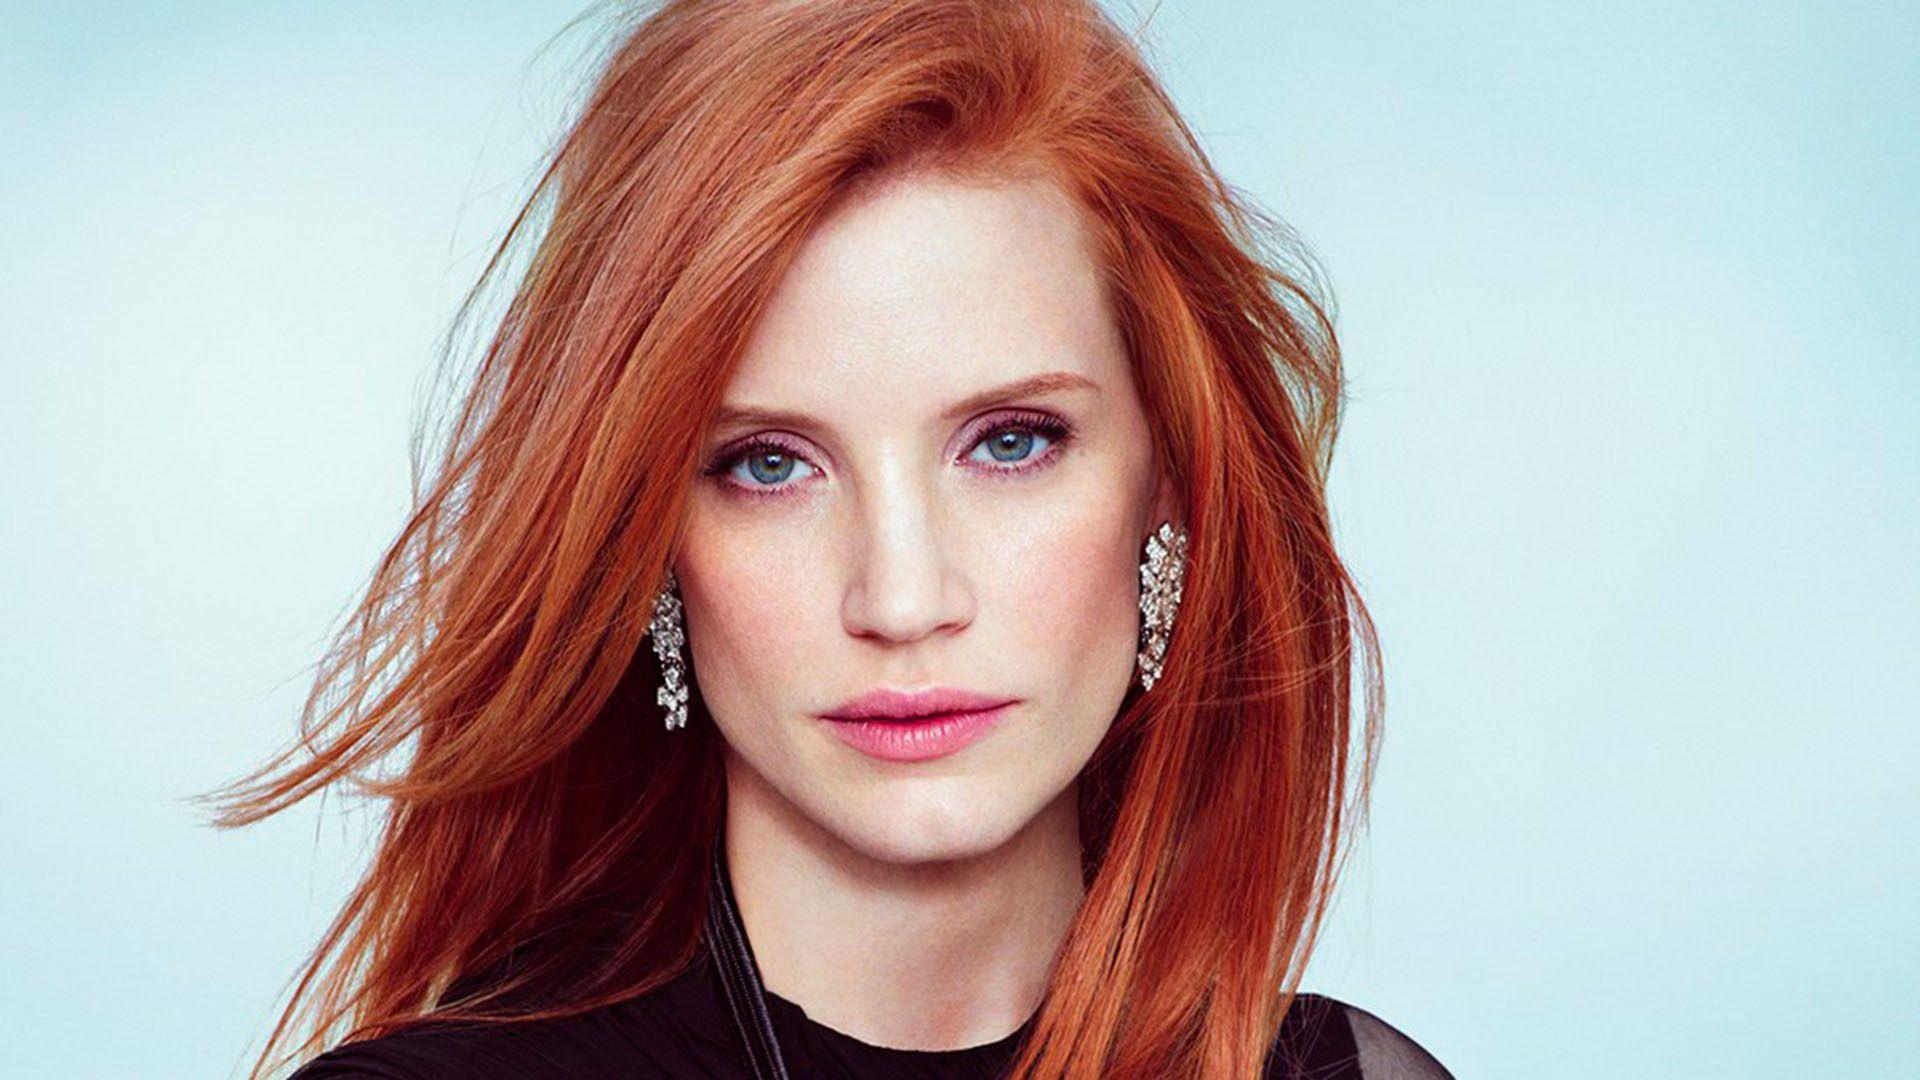 Jessica Chastain 2017 New Photoshoot Wallpapers